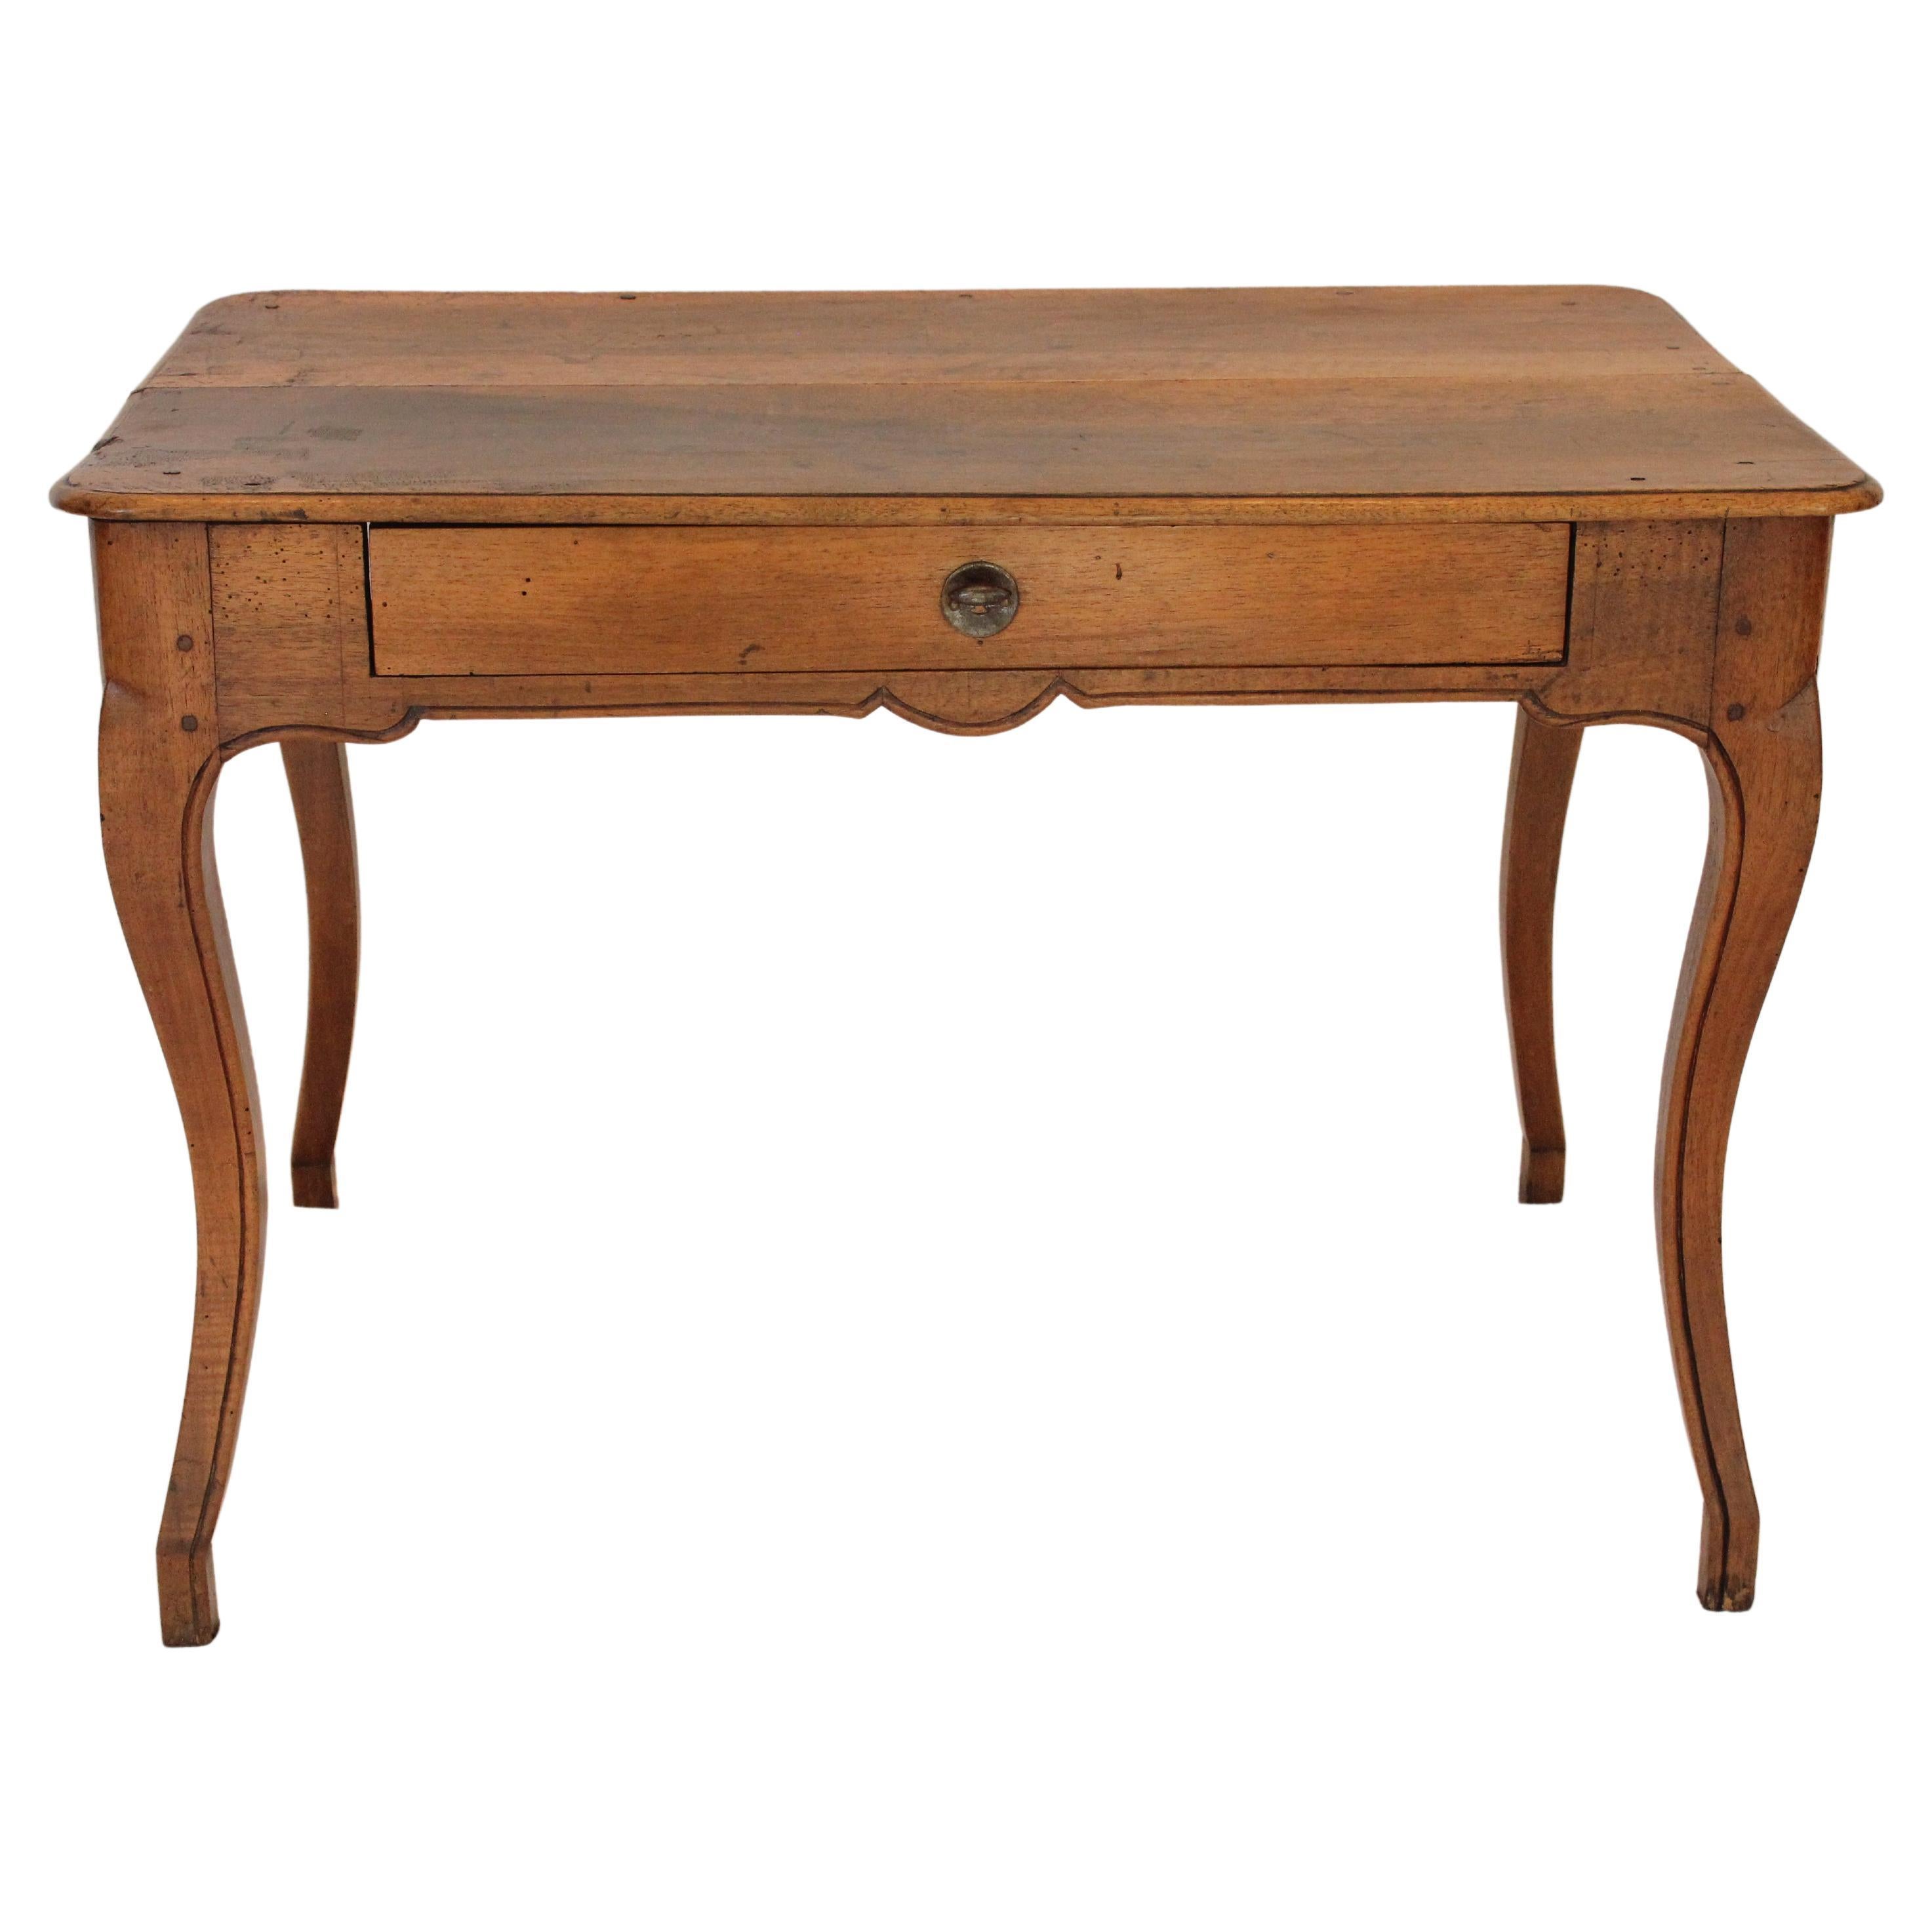 Antique French Provincial Fruitwood Writing Table / Desk W/ Drawer Early 19th C For Sale